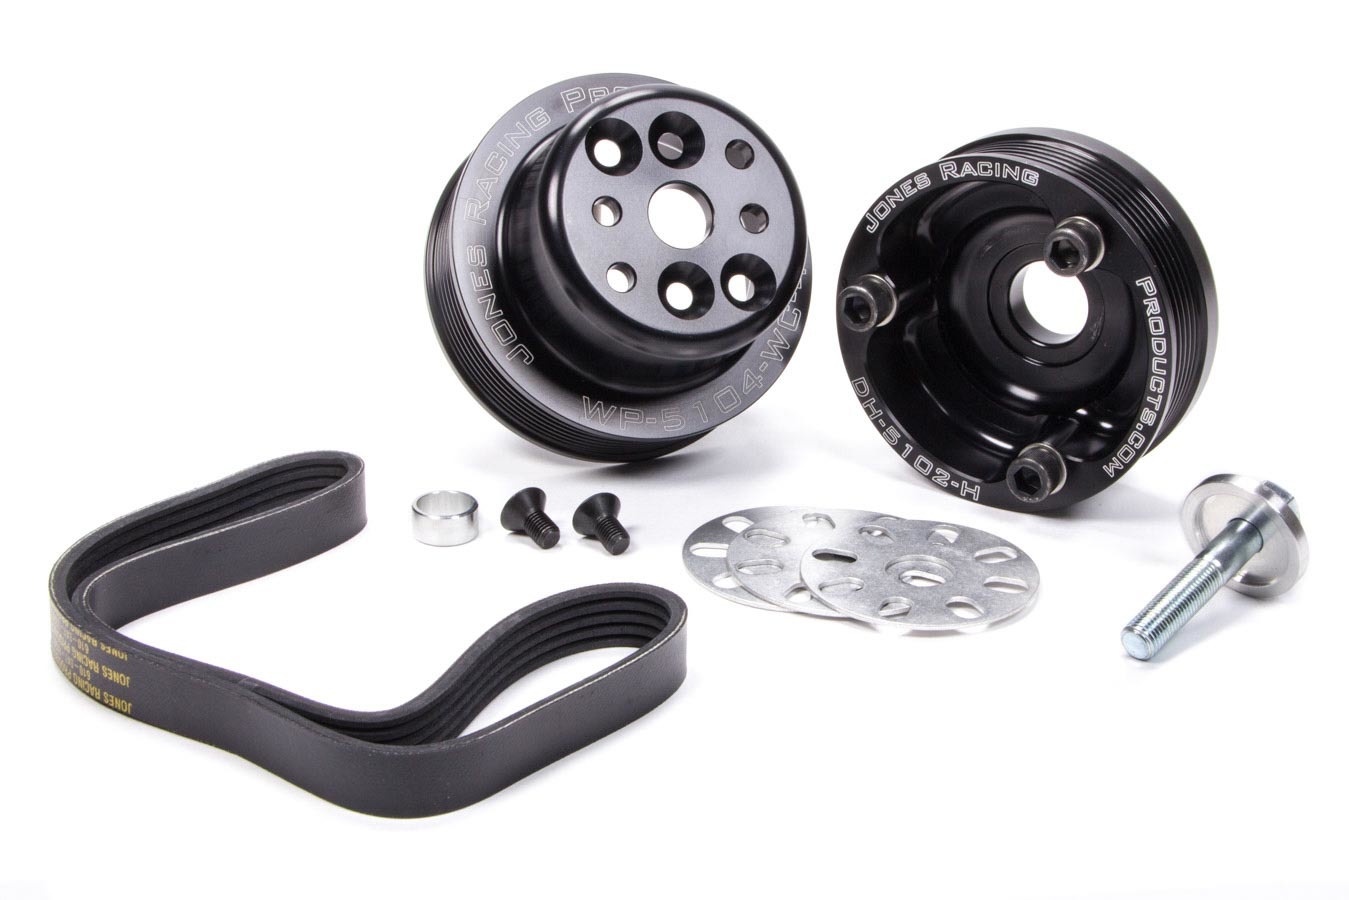 Jones Racing Products 1035-S-CE Pulley Kit, 6-Rib Serpentine, Aluminum, Black Anodized, Small Block Chevy, Kit